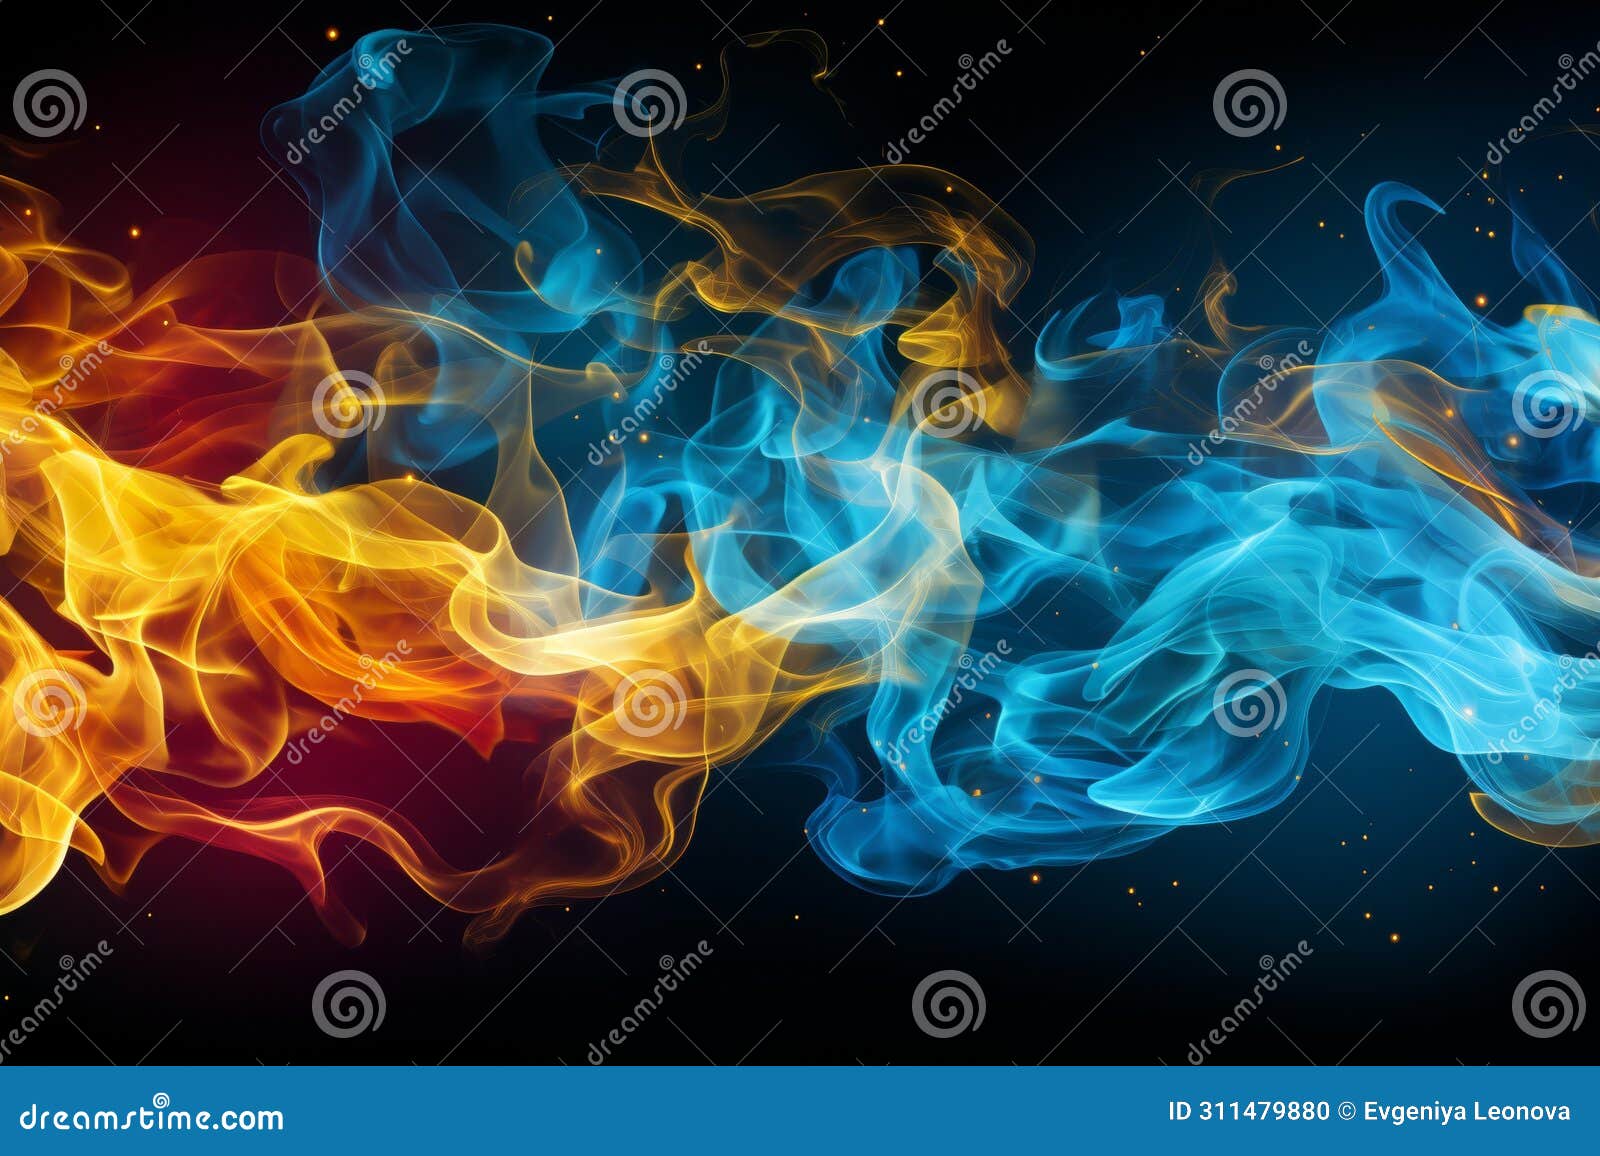 dramatic blue and yellow smoke explosion for ukraine themed background with scary glowing effect